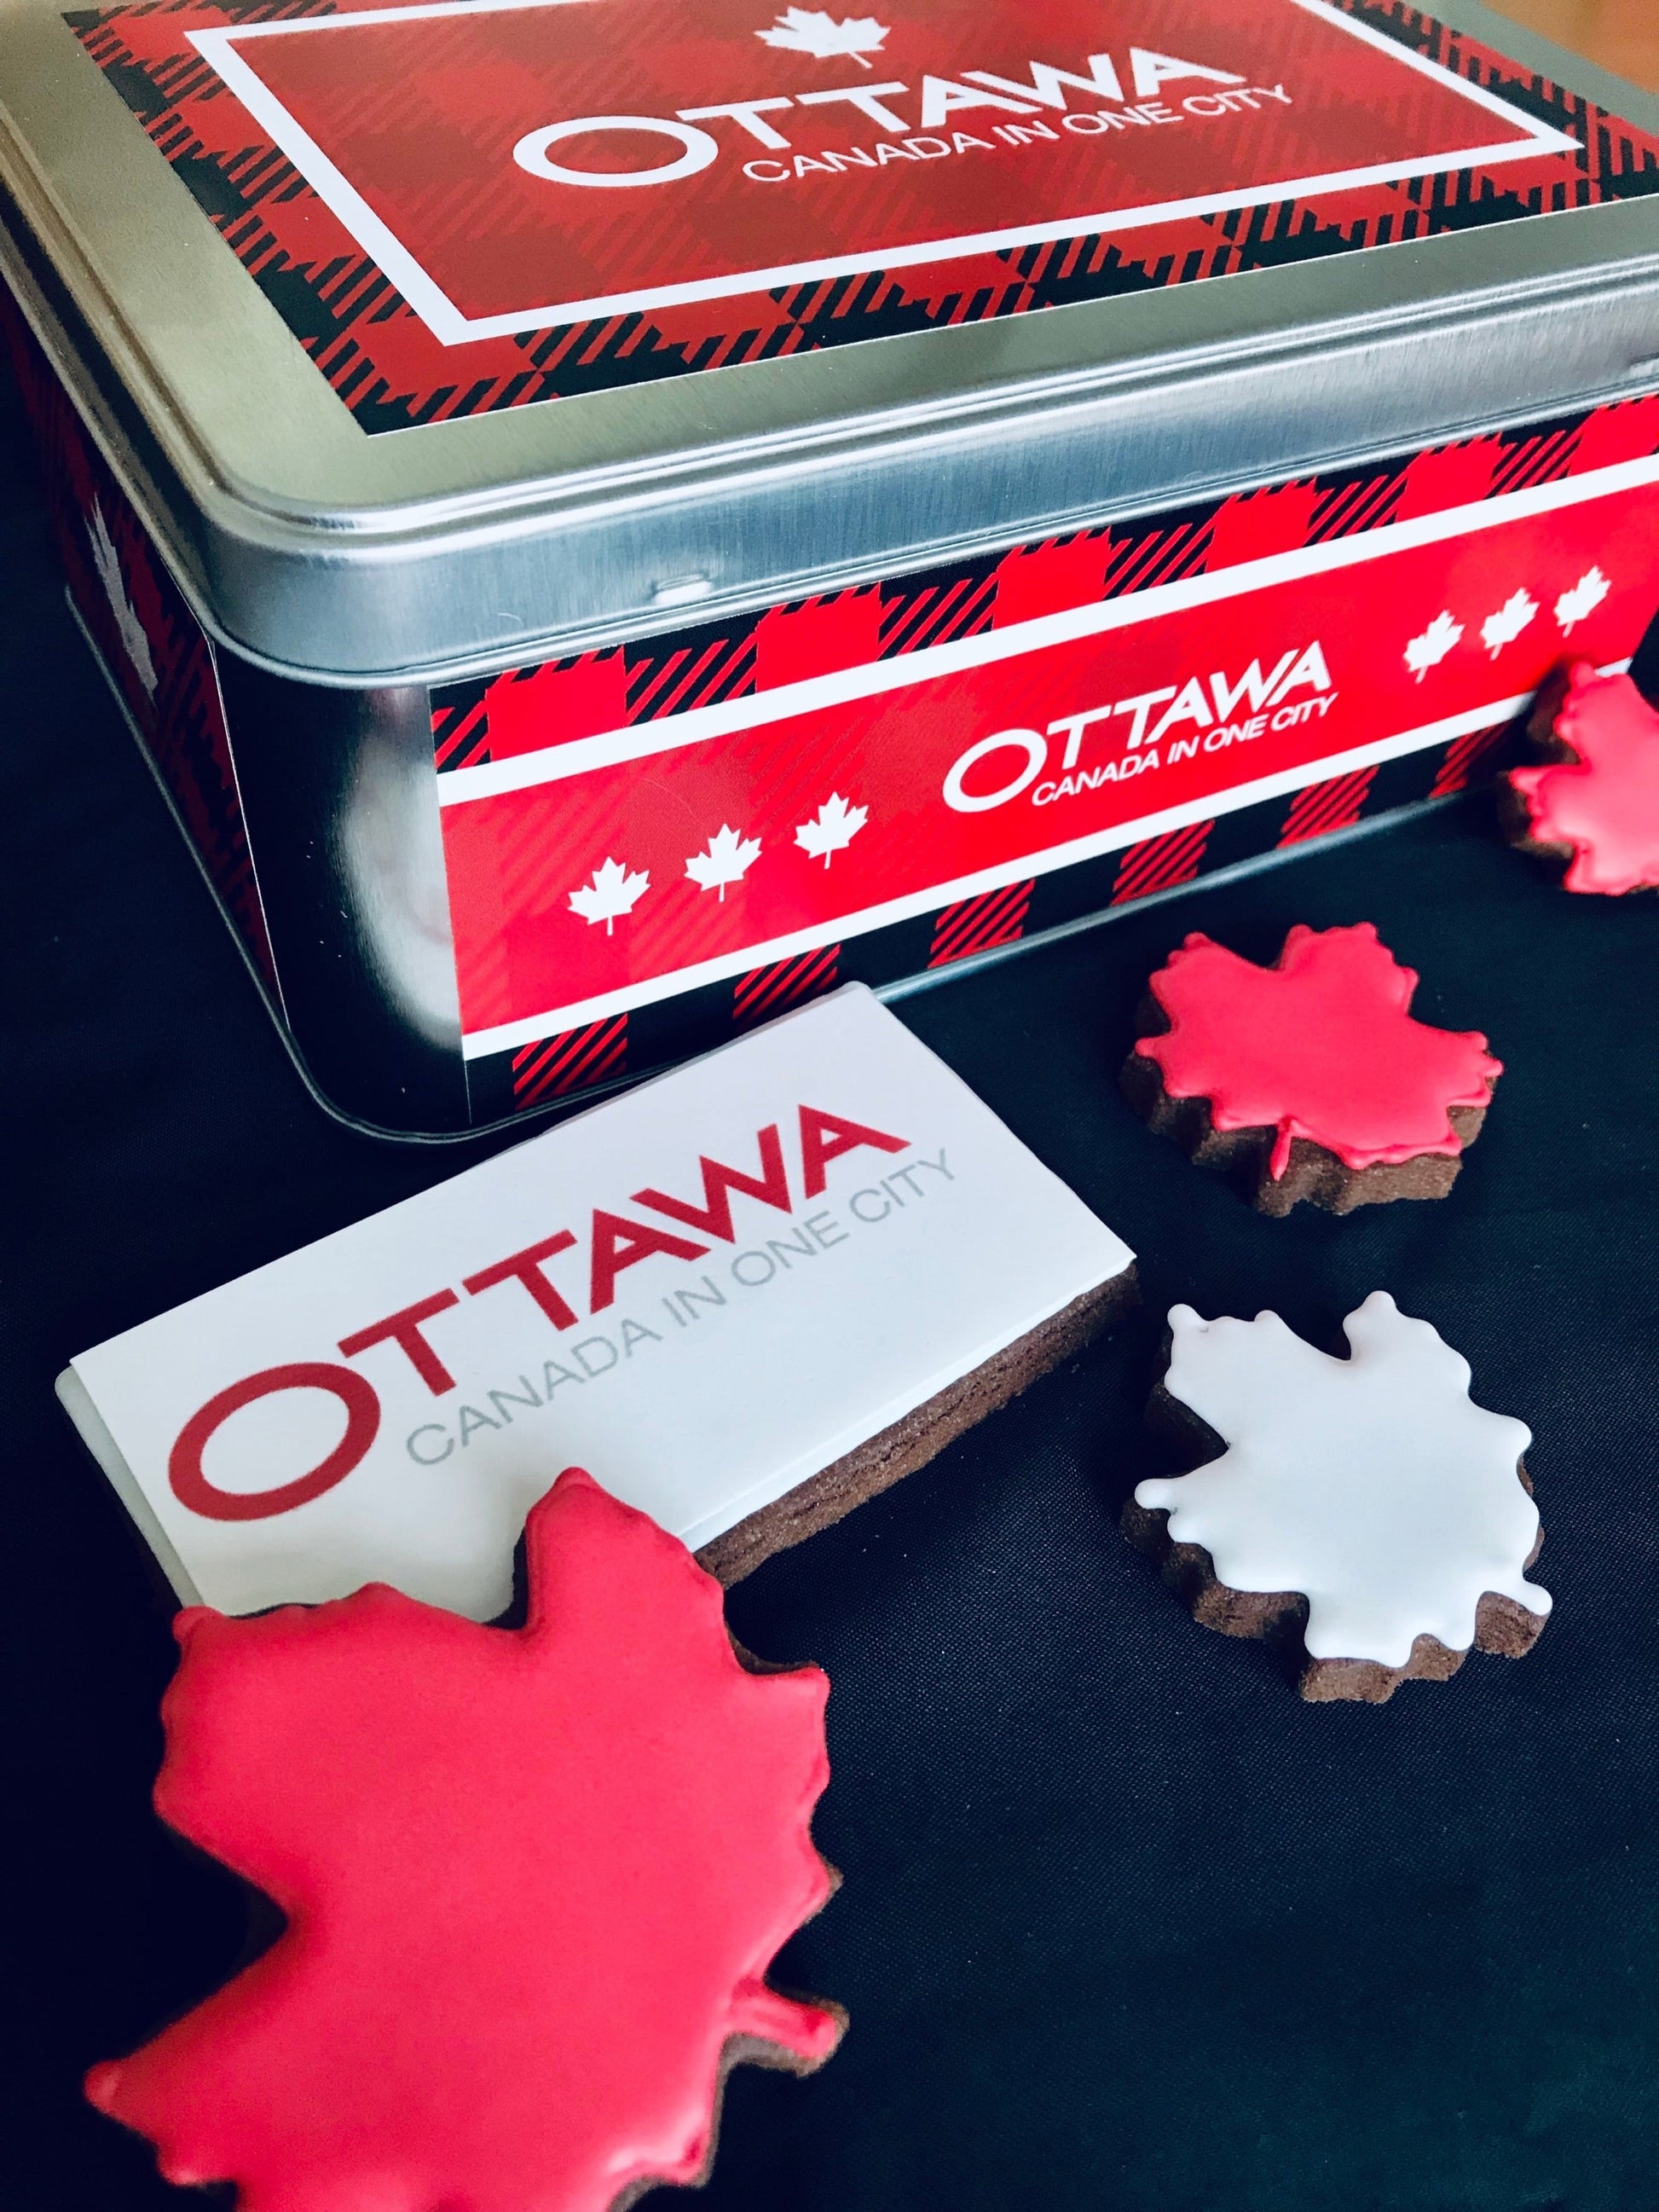 Ottawa cookies. Branded biscuit tin with logo biscuits inside. Canada maple leaf shaped biscuits and printed logo biscuits inside a tin that includes a corporate logo.